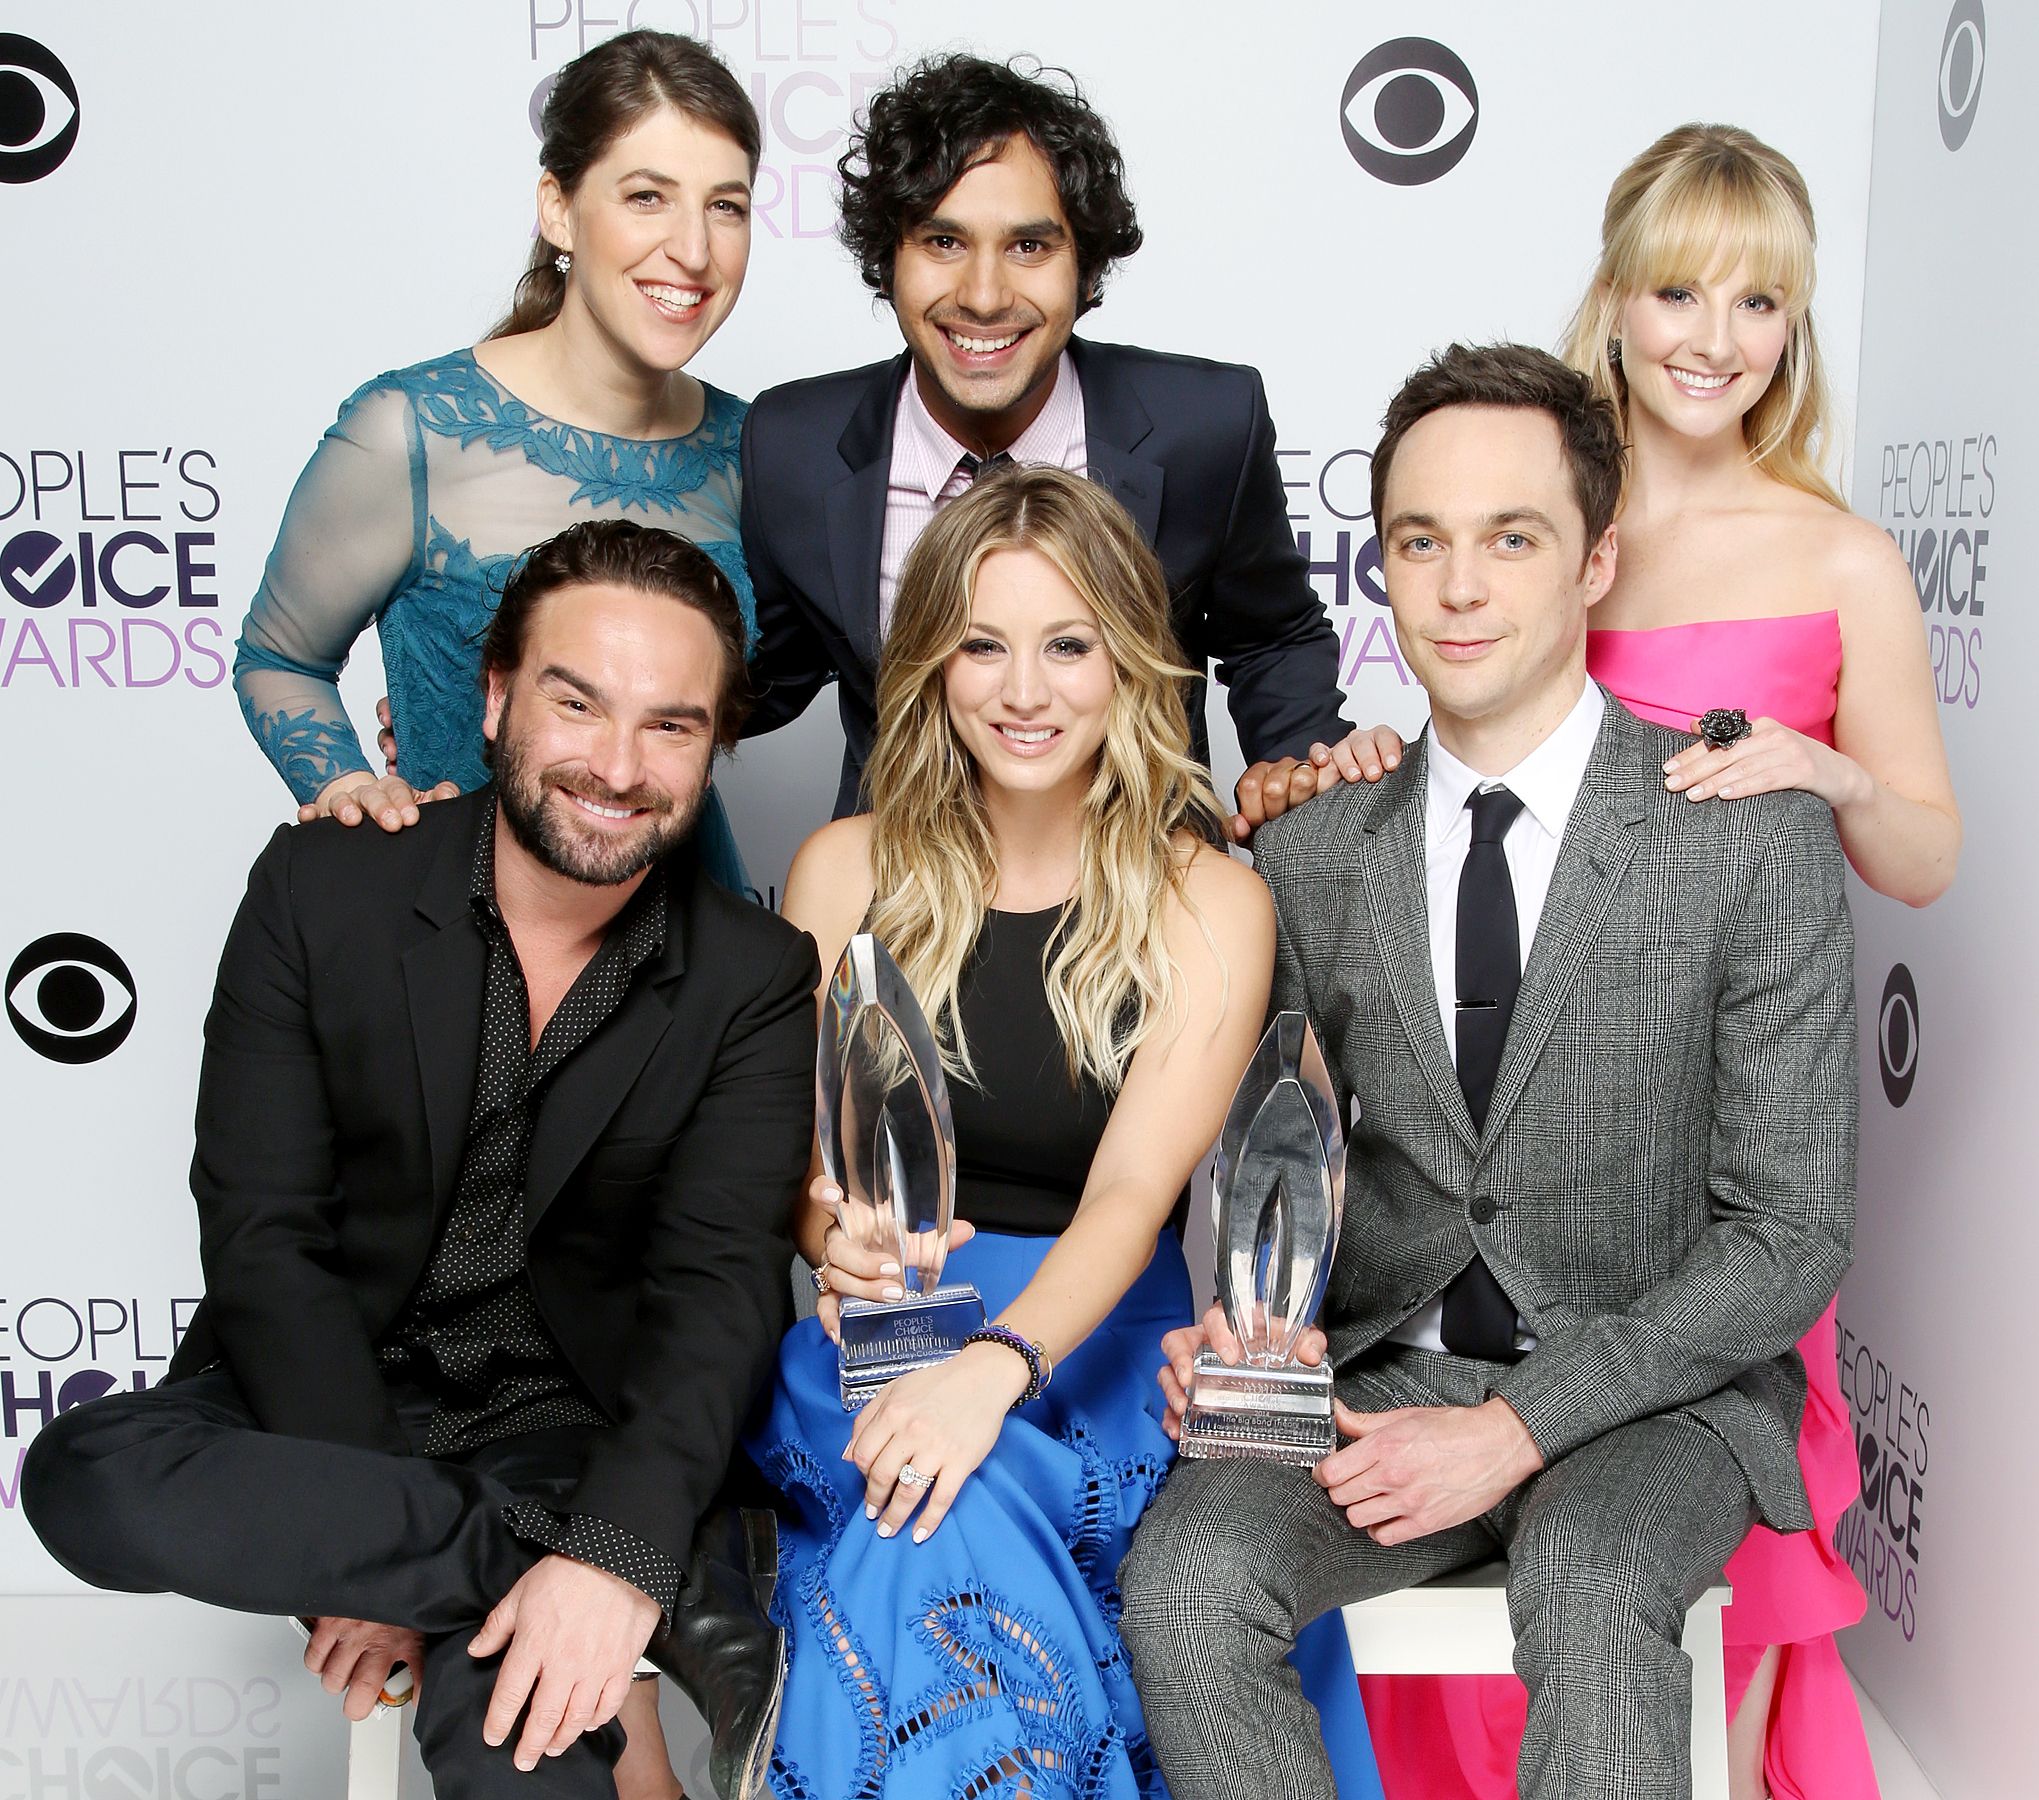 The Big Bang Theory: What Were The Characters’ Salaries In The Final Season?